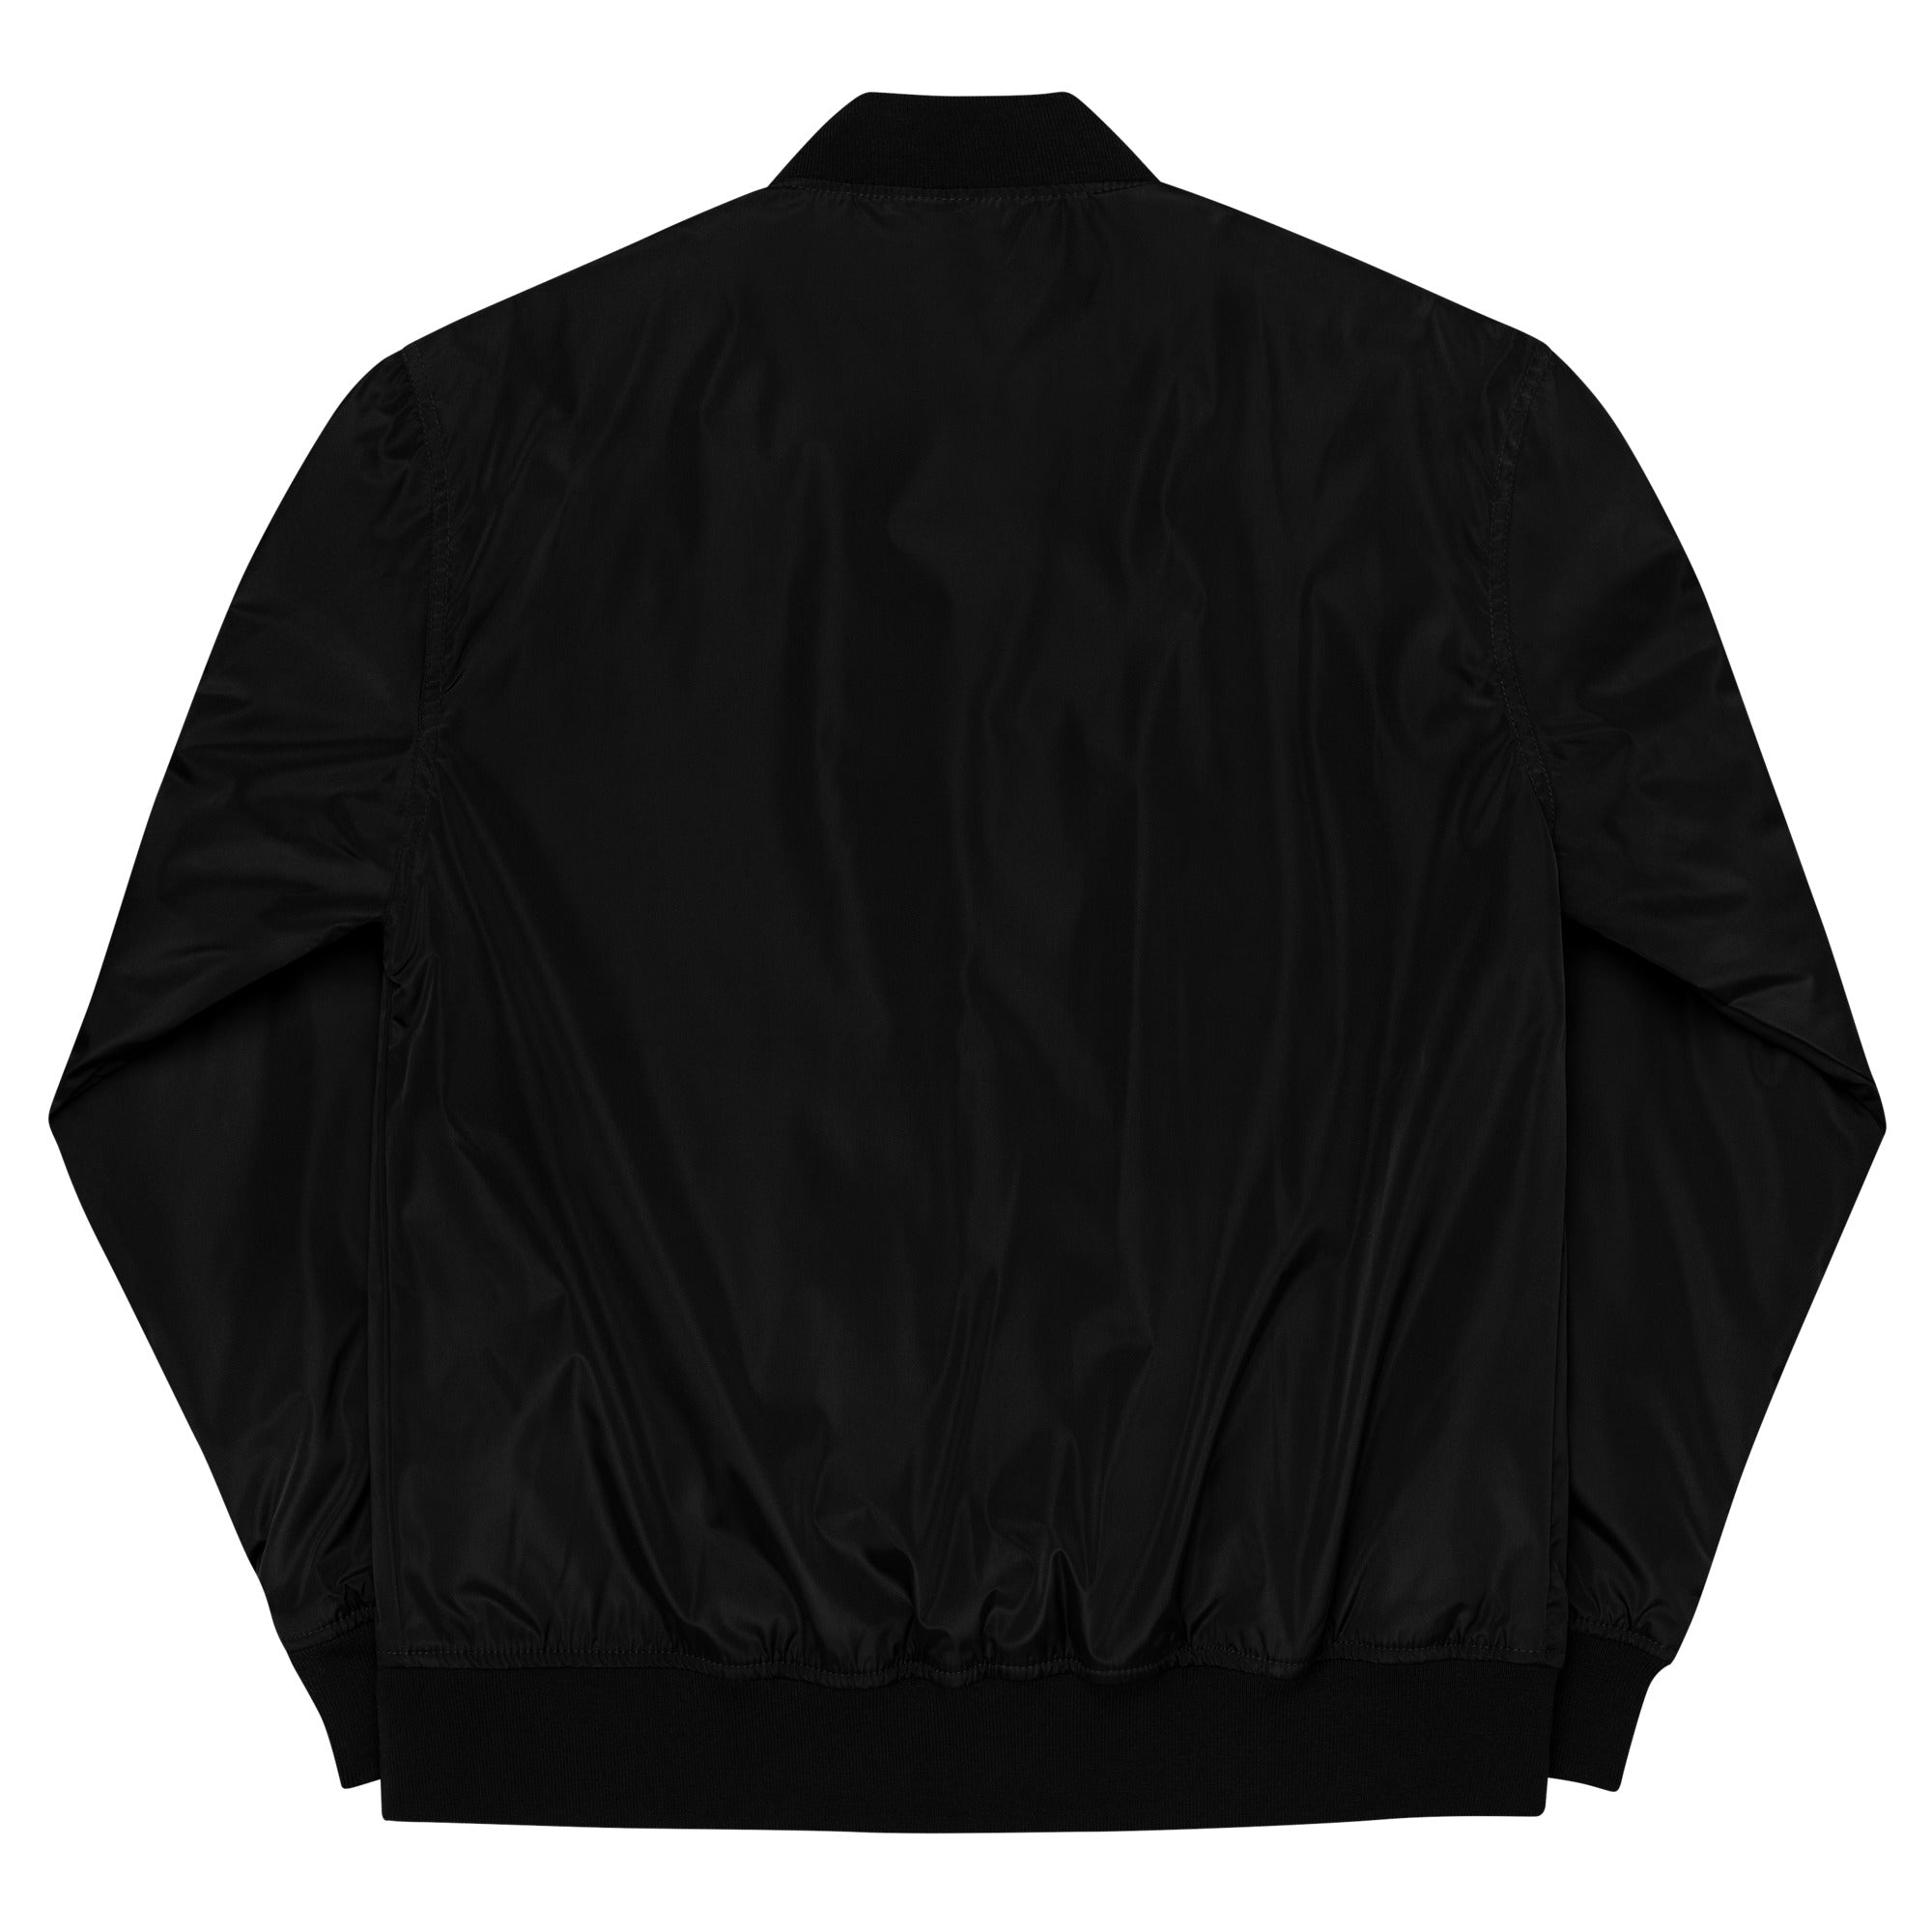 Z NOT FOR SALE recycled bomber jacket